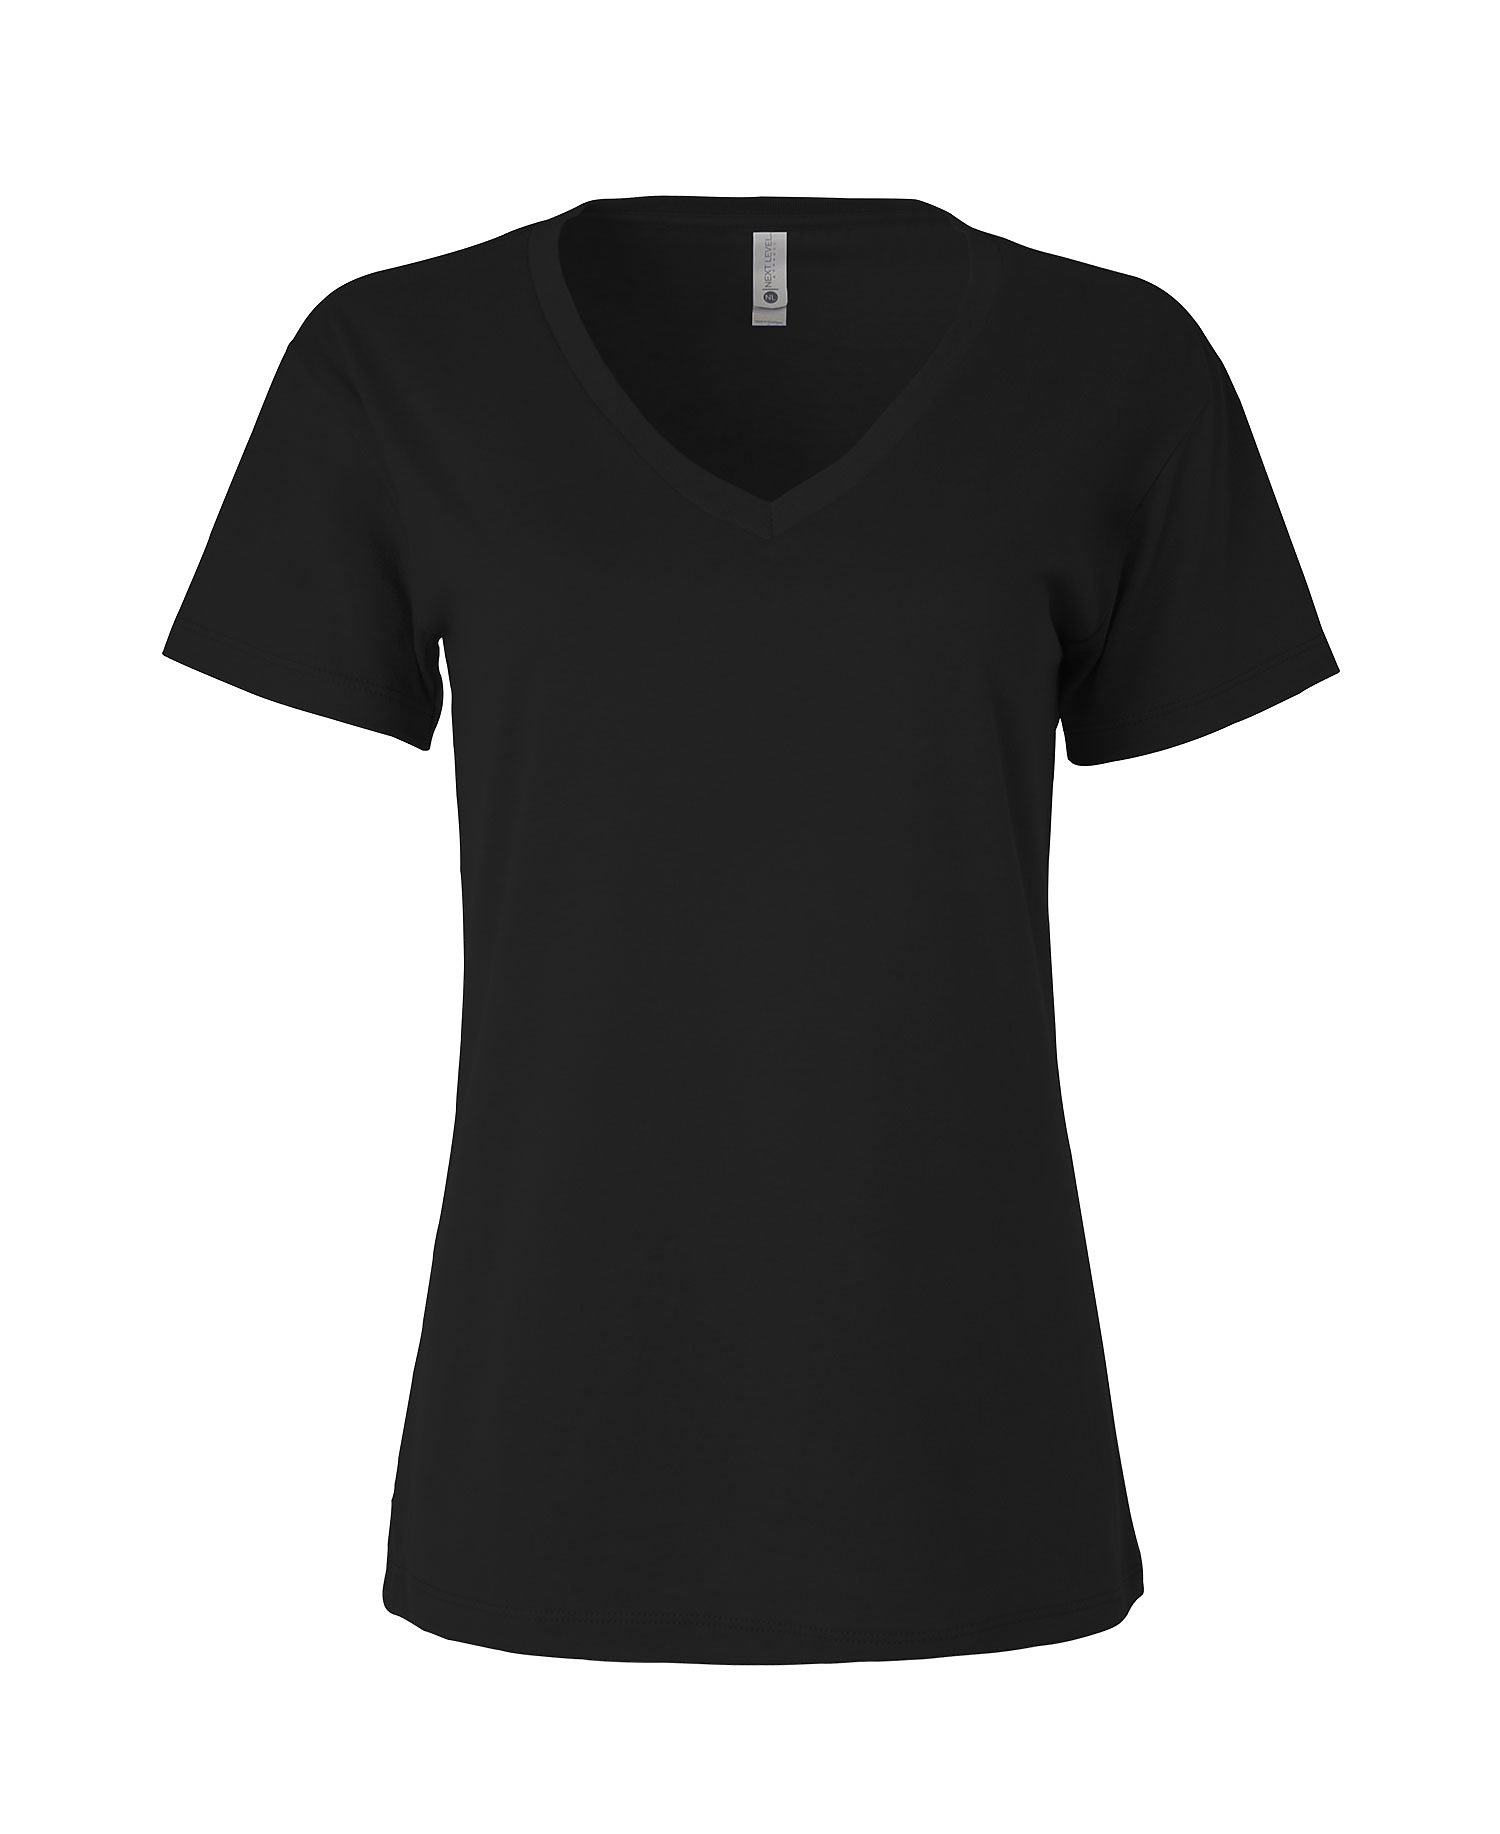 Next Level Apparel 3940 - Women's Relaxed V Tee